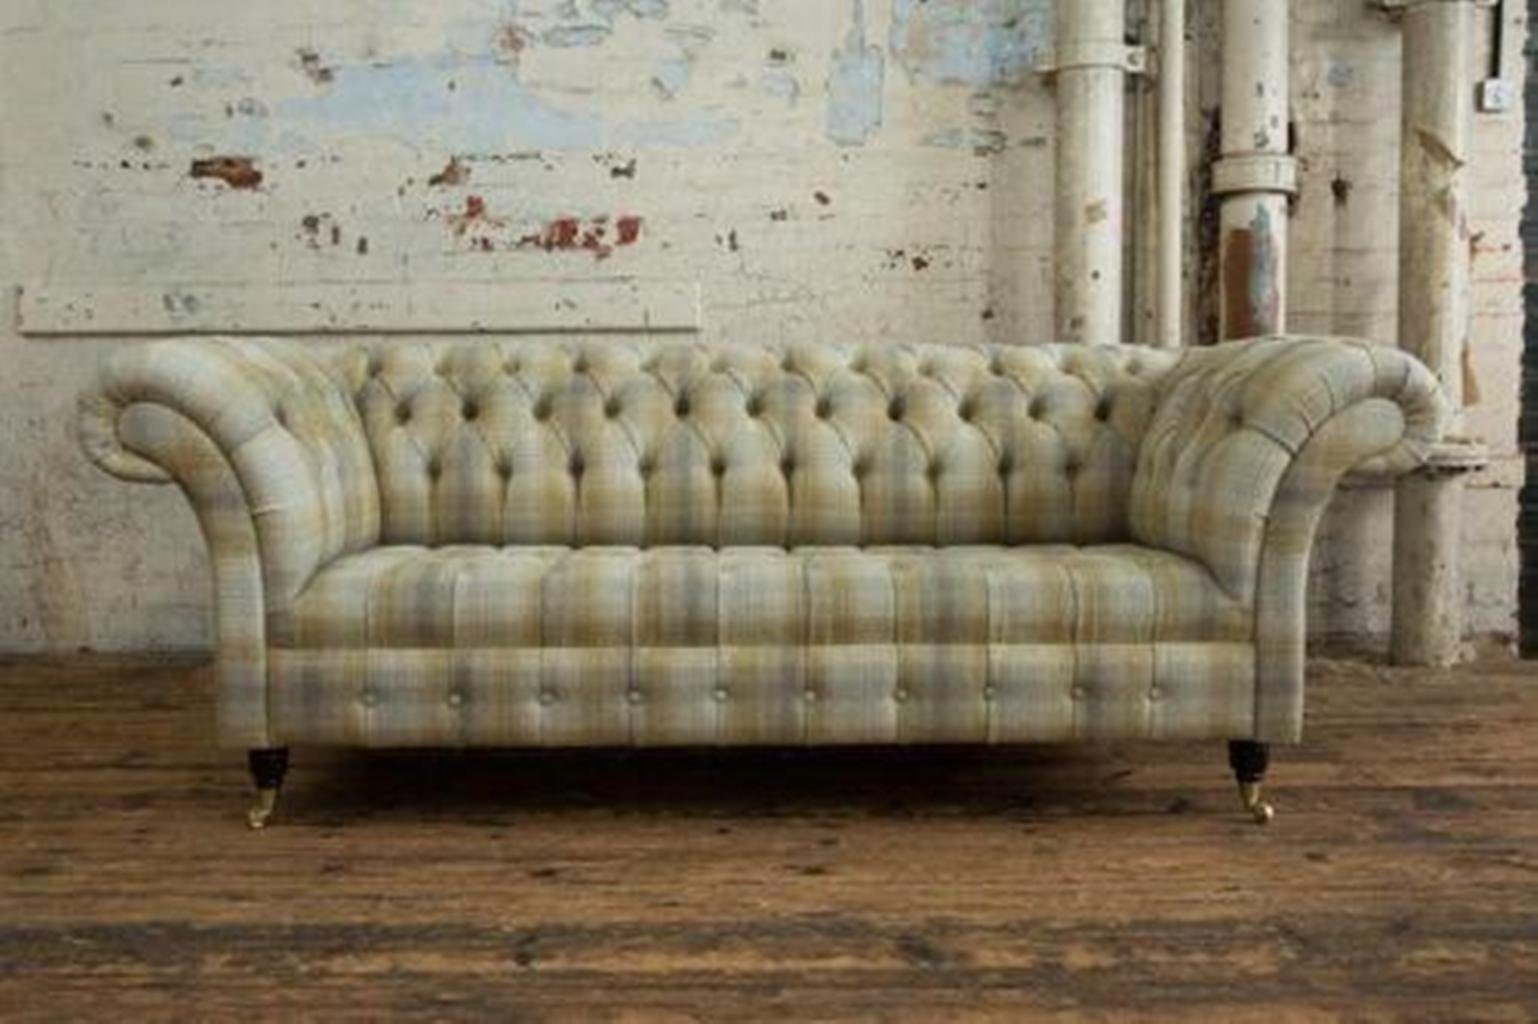 JVmoebel Chesterfield-Sofa, Chesterfield Textil Sofa Couchen Couch Sofas Polster